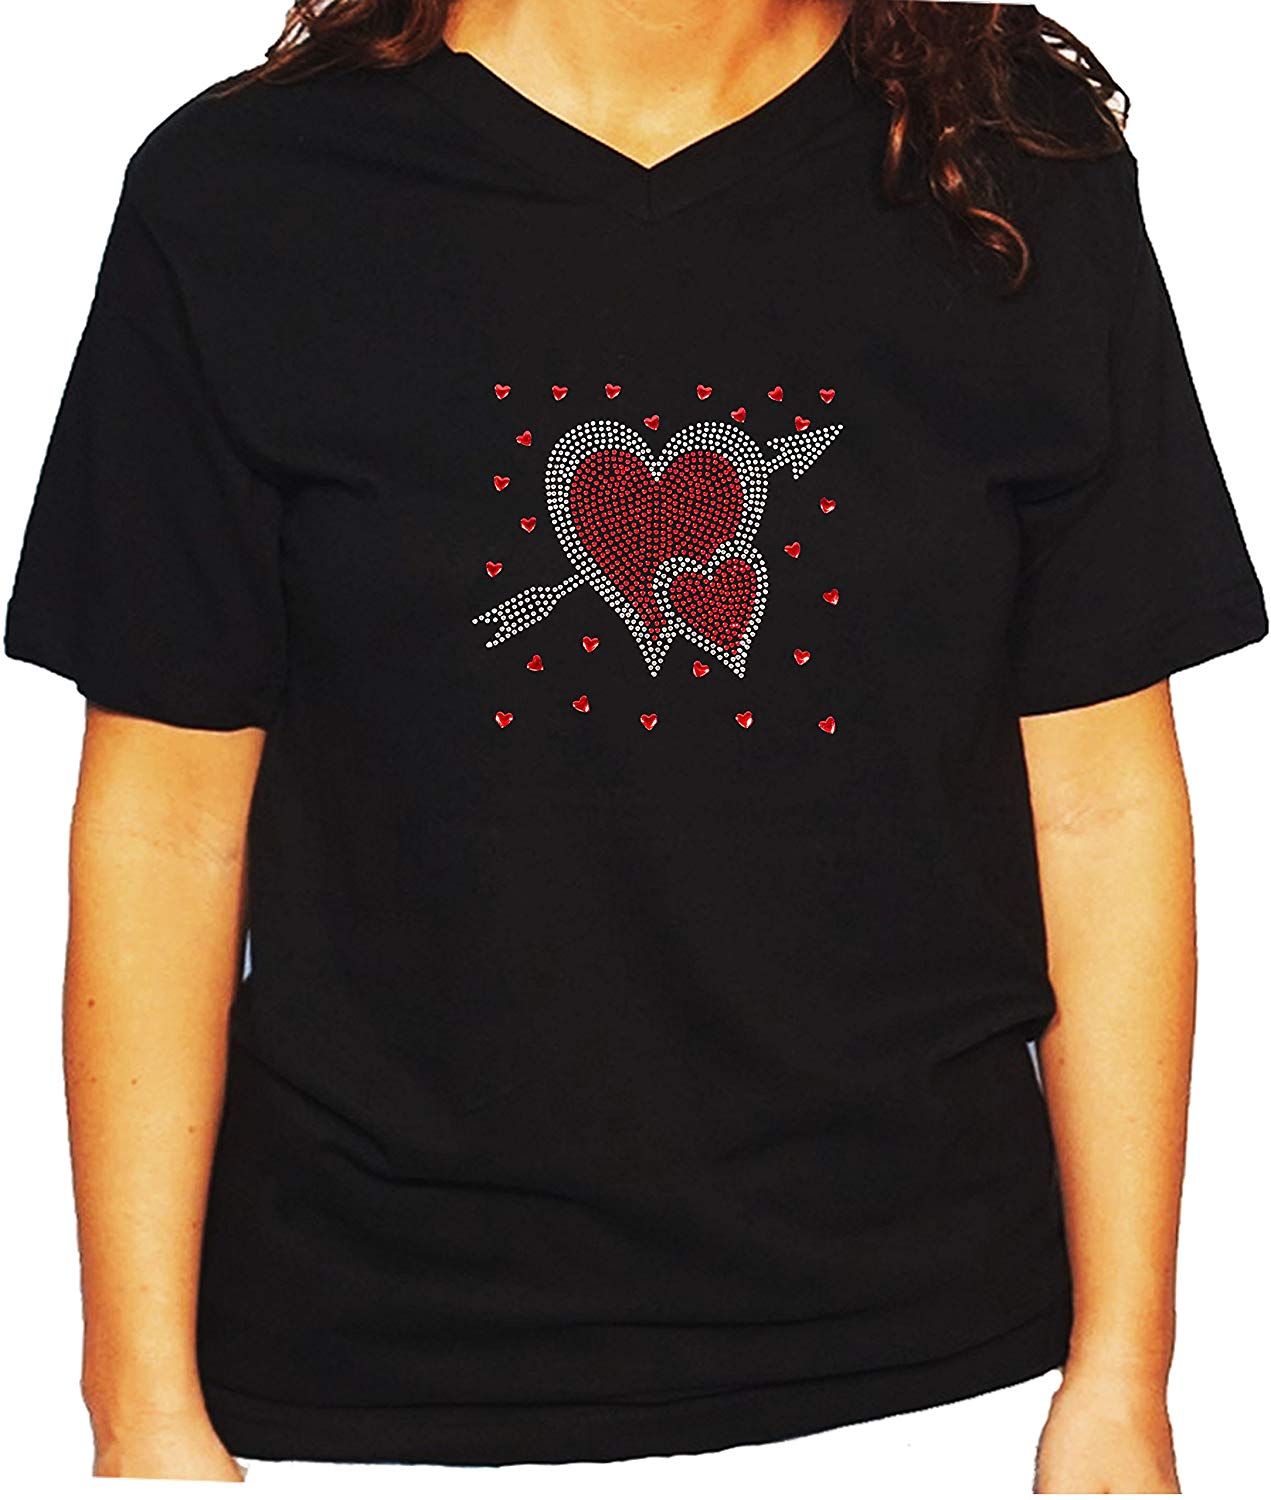 Women's / Unisex T-Shirt with Hearts With Arrow in Rhinestones